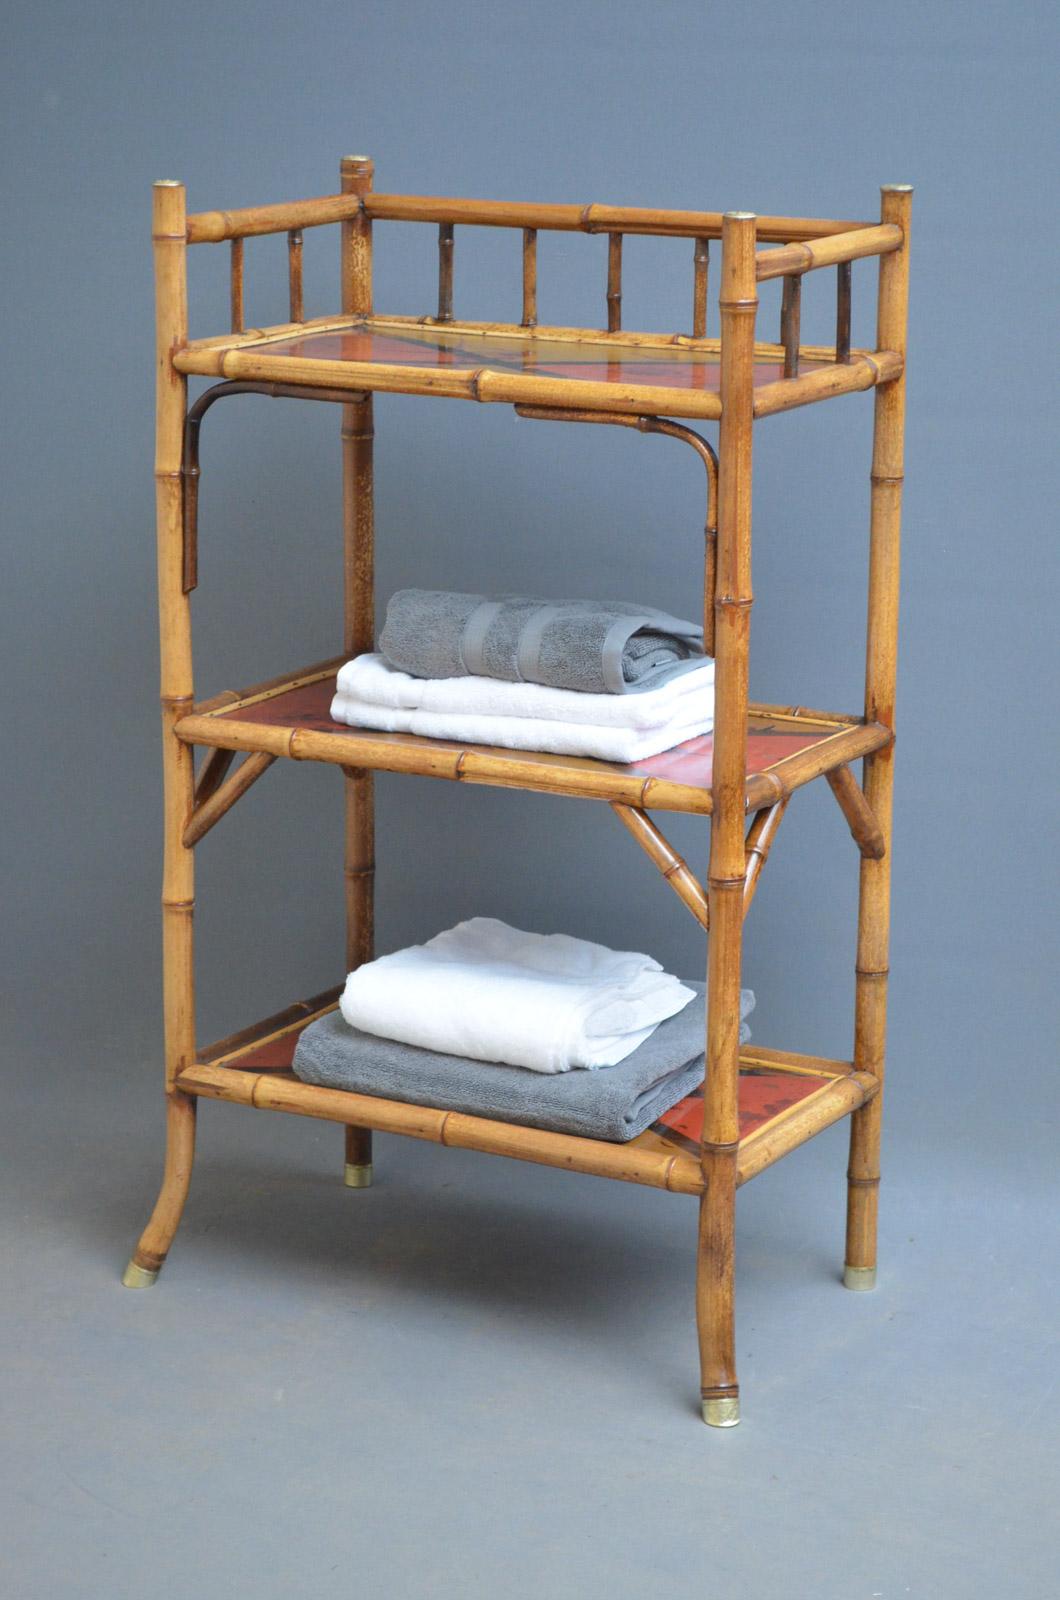 Sn3183, very practical, Victorian, bamboo stand - étagère, having three tiers with lacquered decoration depicting birds and flowers, standing on four outswept legs with brass caps. This is a perfect stand for the bathroom but it would also make a